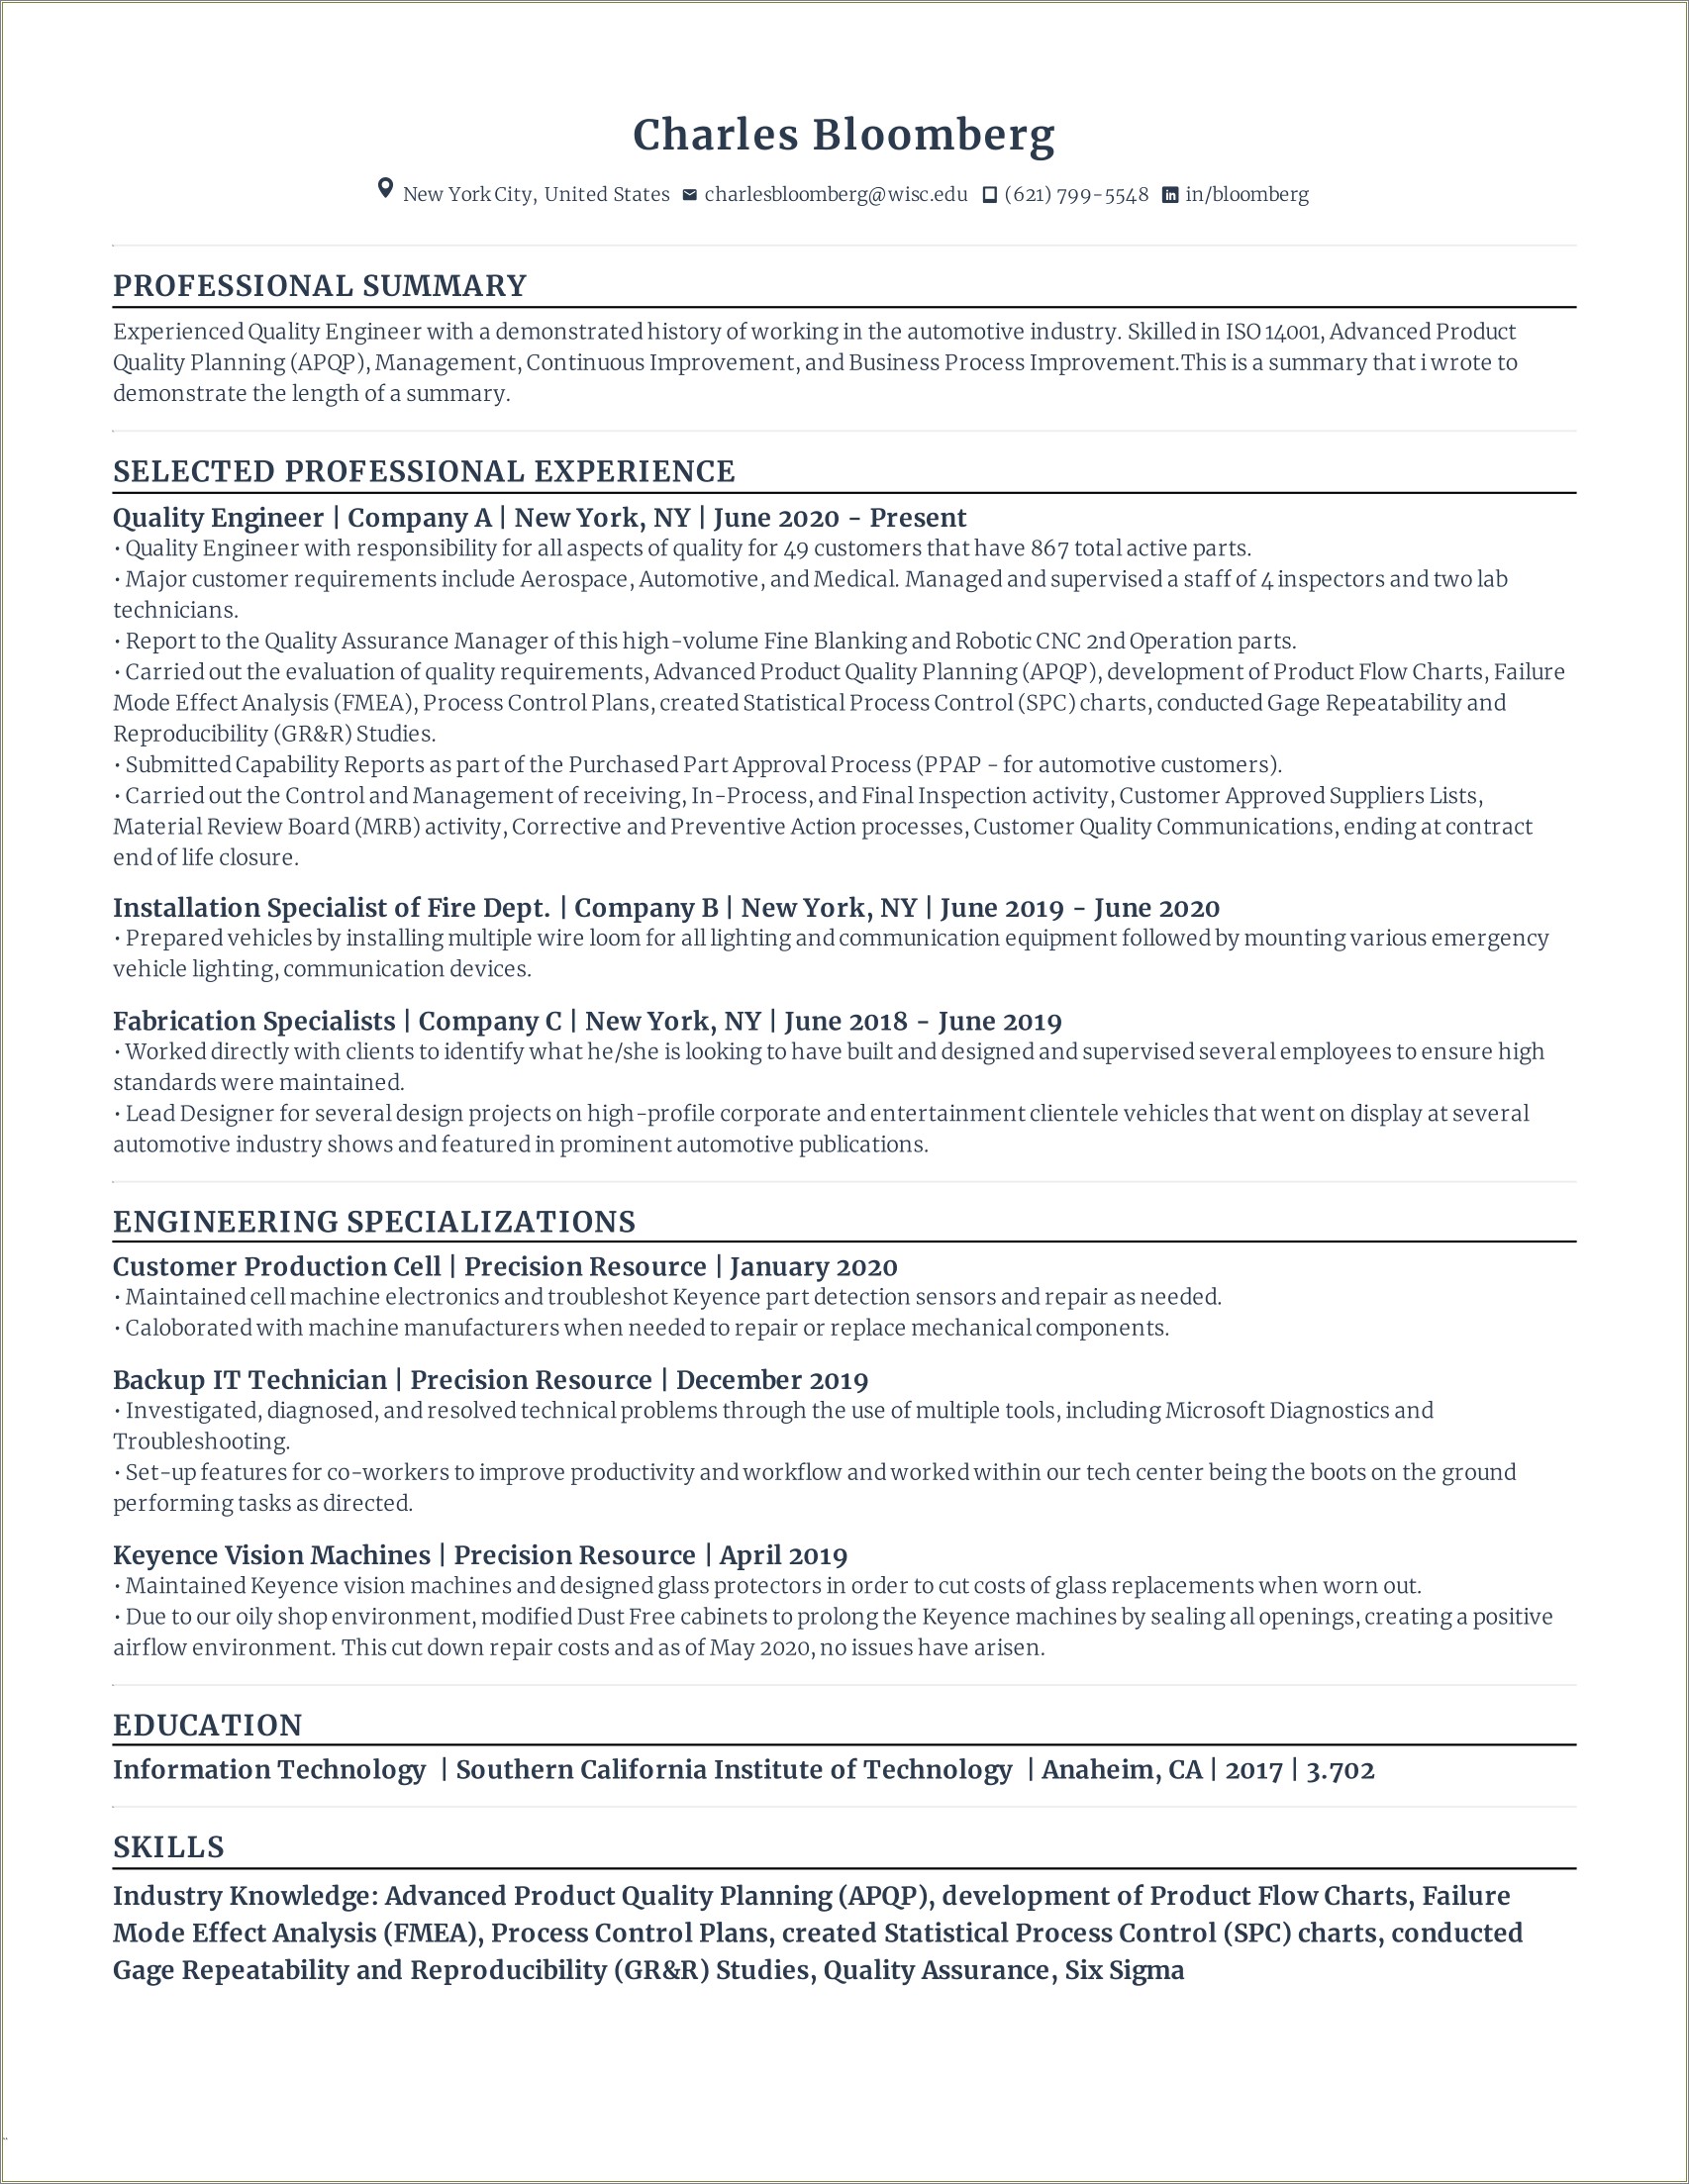 Correct Chronological Order Of Overlapping Jobs On Resume